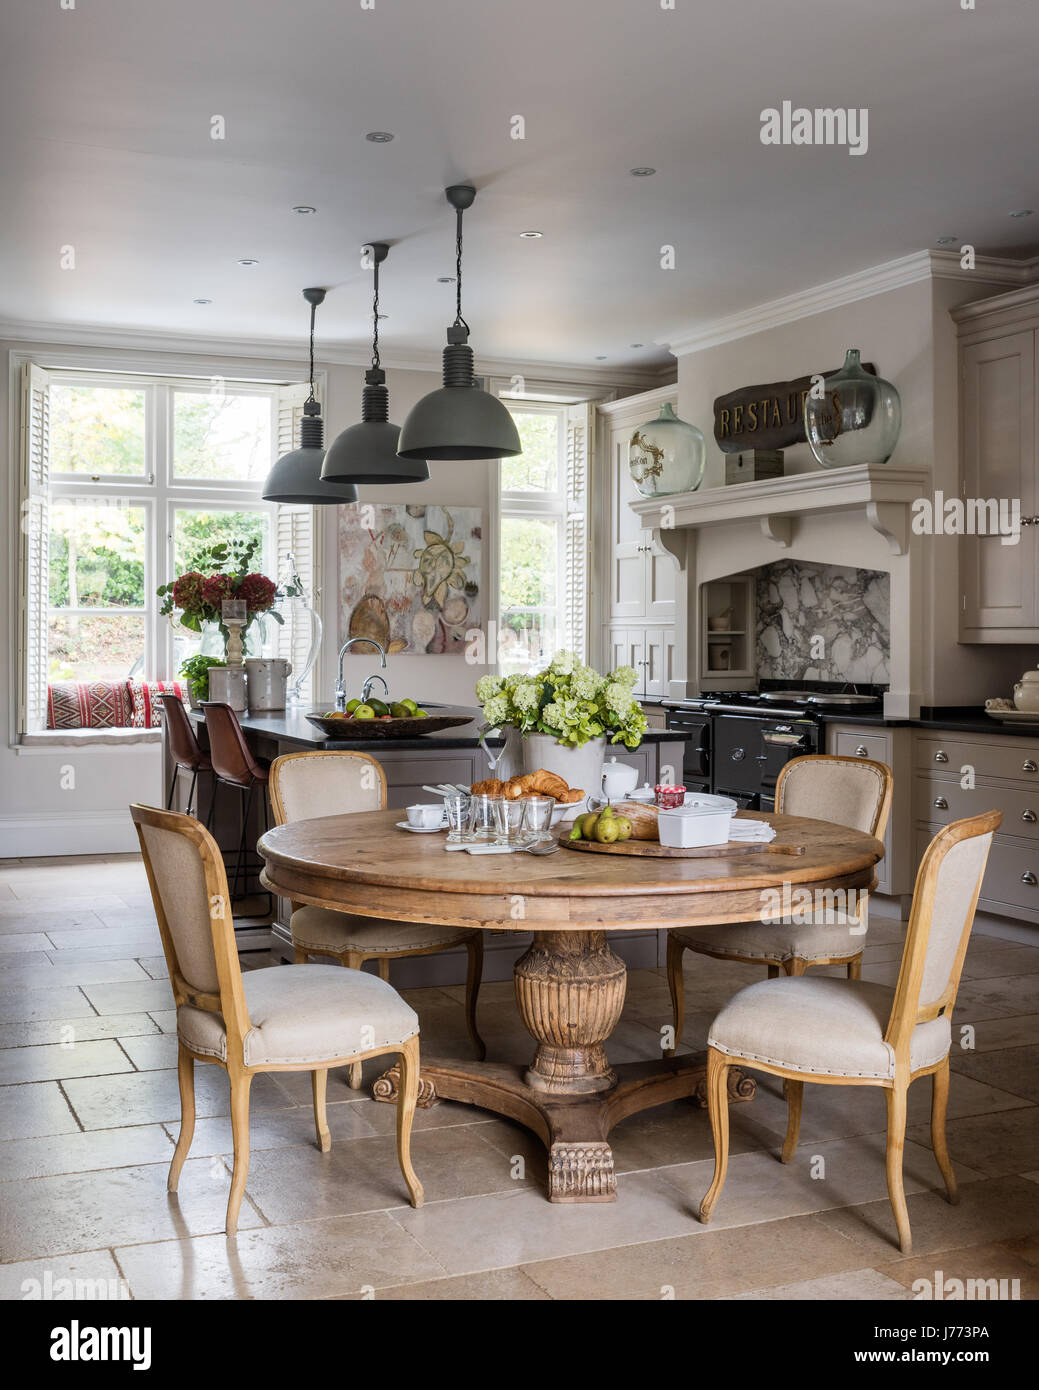 Spacious kitchen diner with limestone floor tiles and bespoke kitchen units by Thomas Ford & Sons. Circular table and chairs all by Bardoe & Appel. Stock Photo